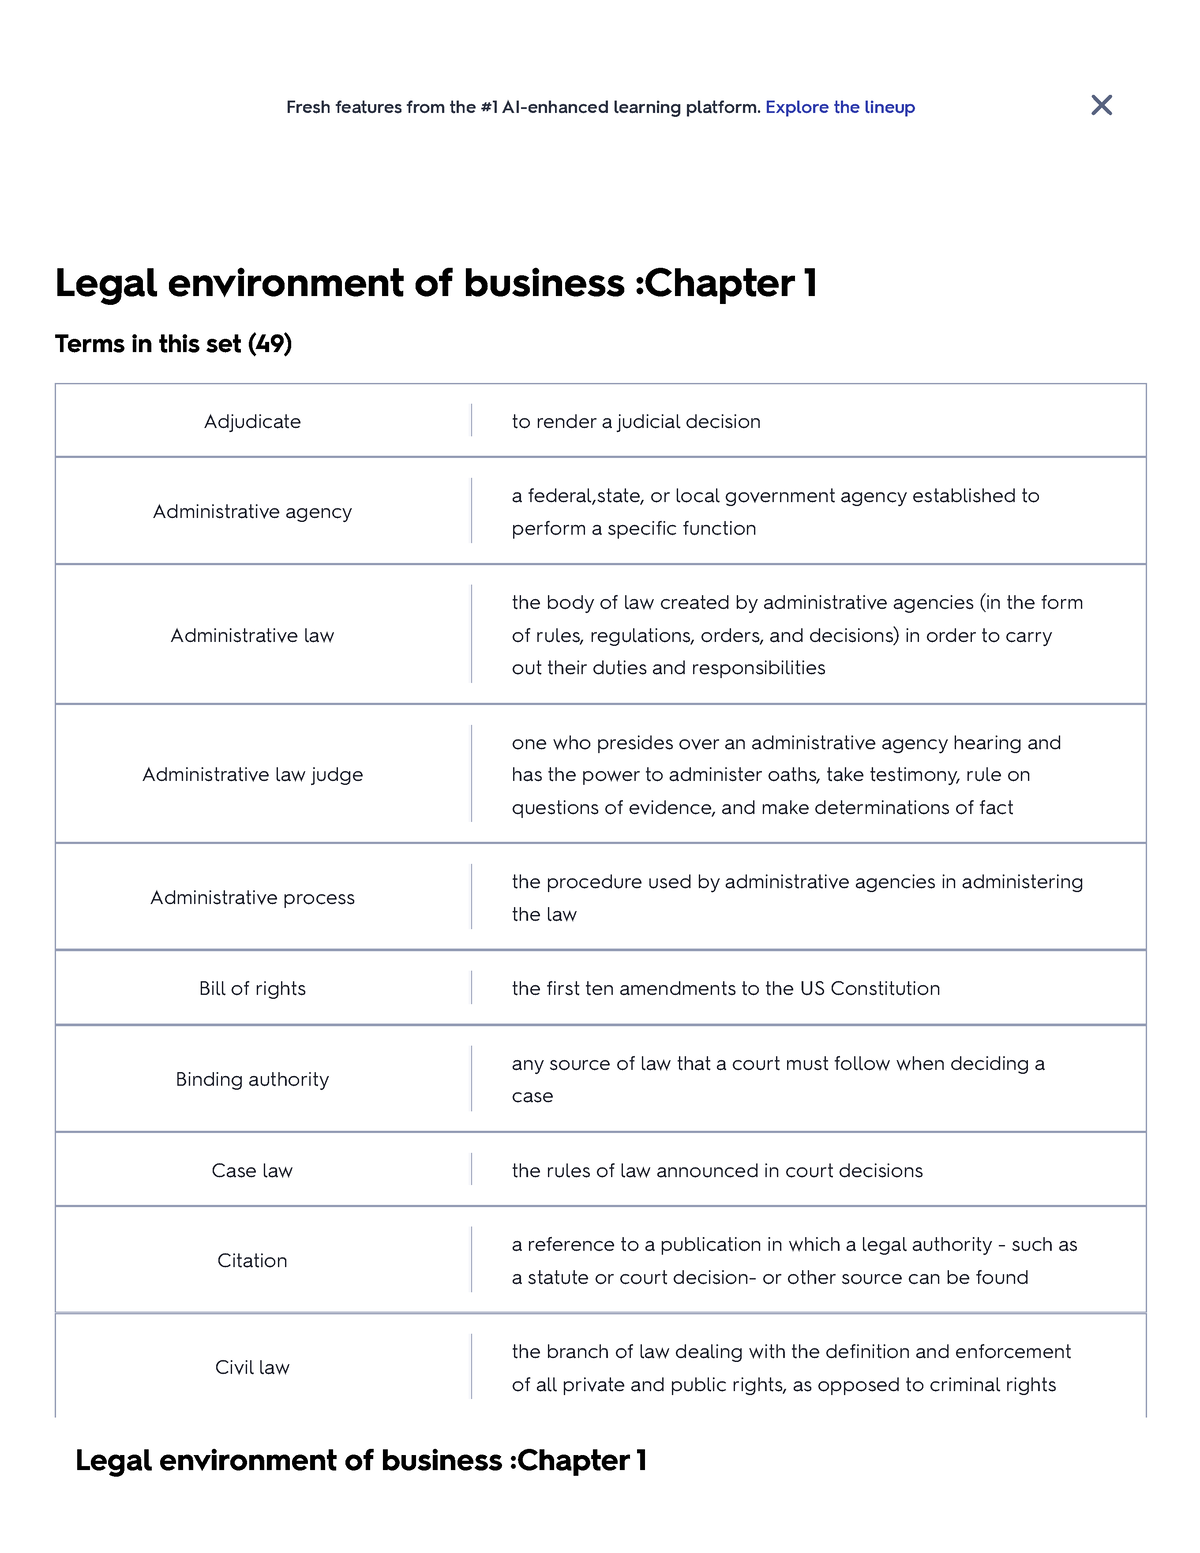 Legal environment of business Chapter 1 Flashcards Quizlet - Legal